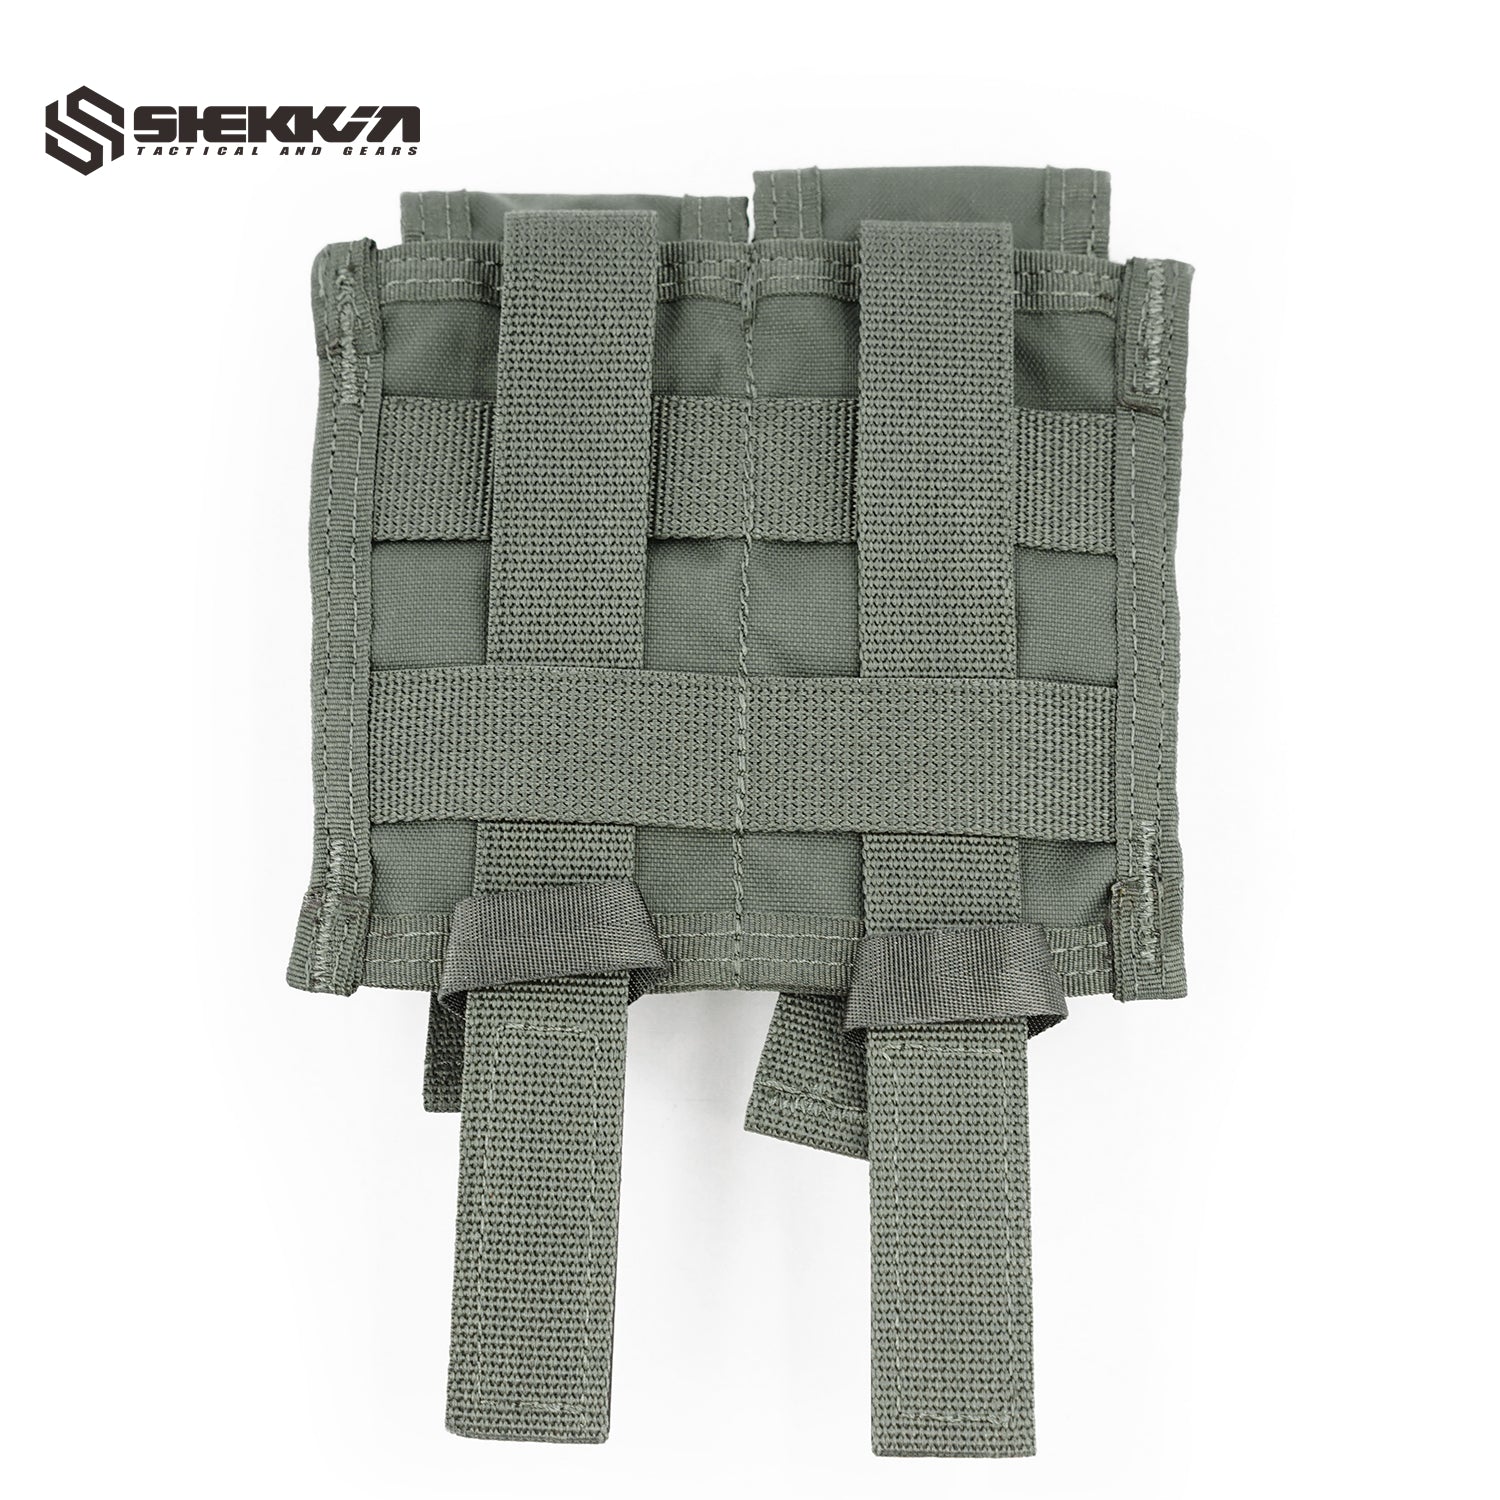 Pre MSA Paraclete style double smoke pouch with buckles - Shekkin Gears